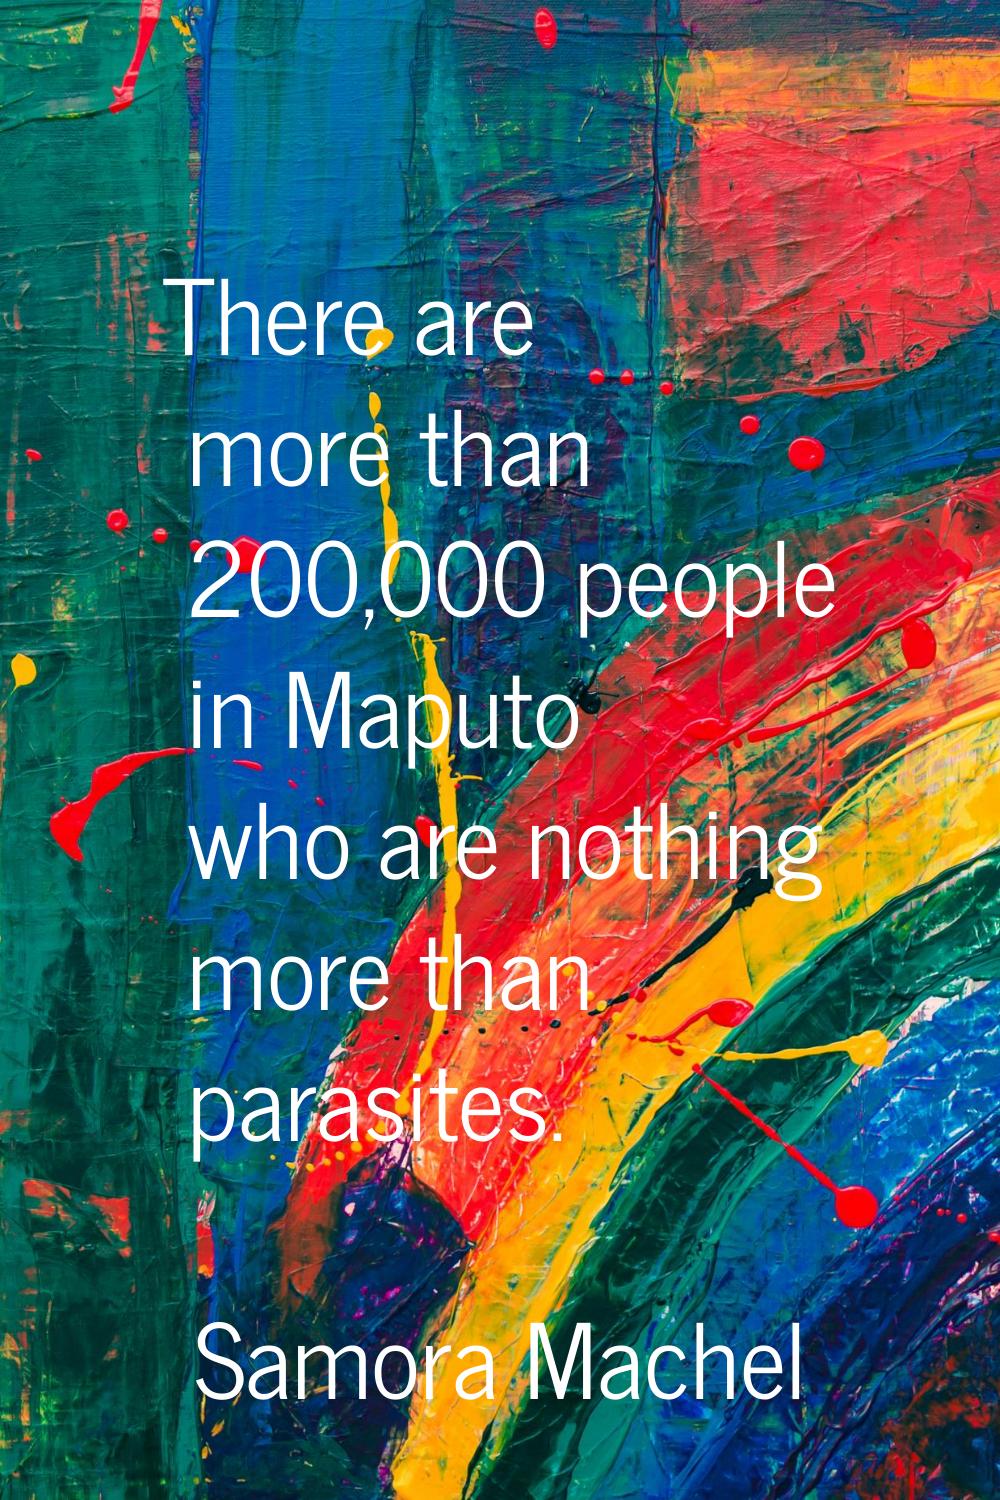 There are more than 200,000 people in Maputo who are nothing more than parasites.